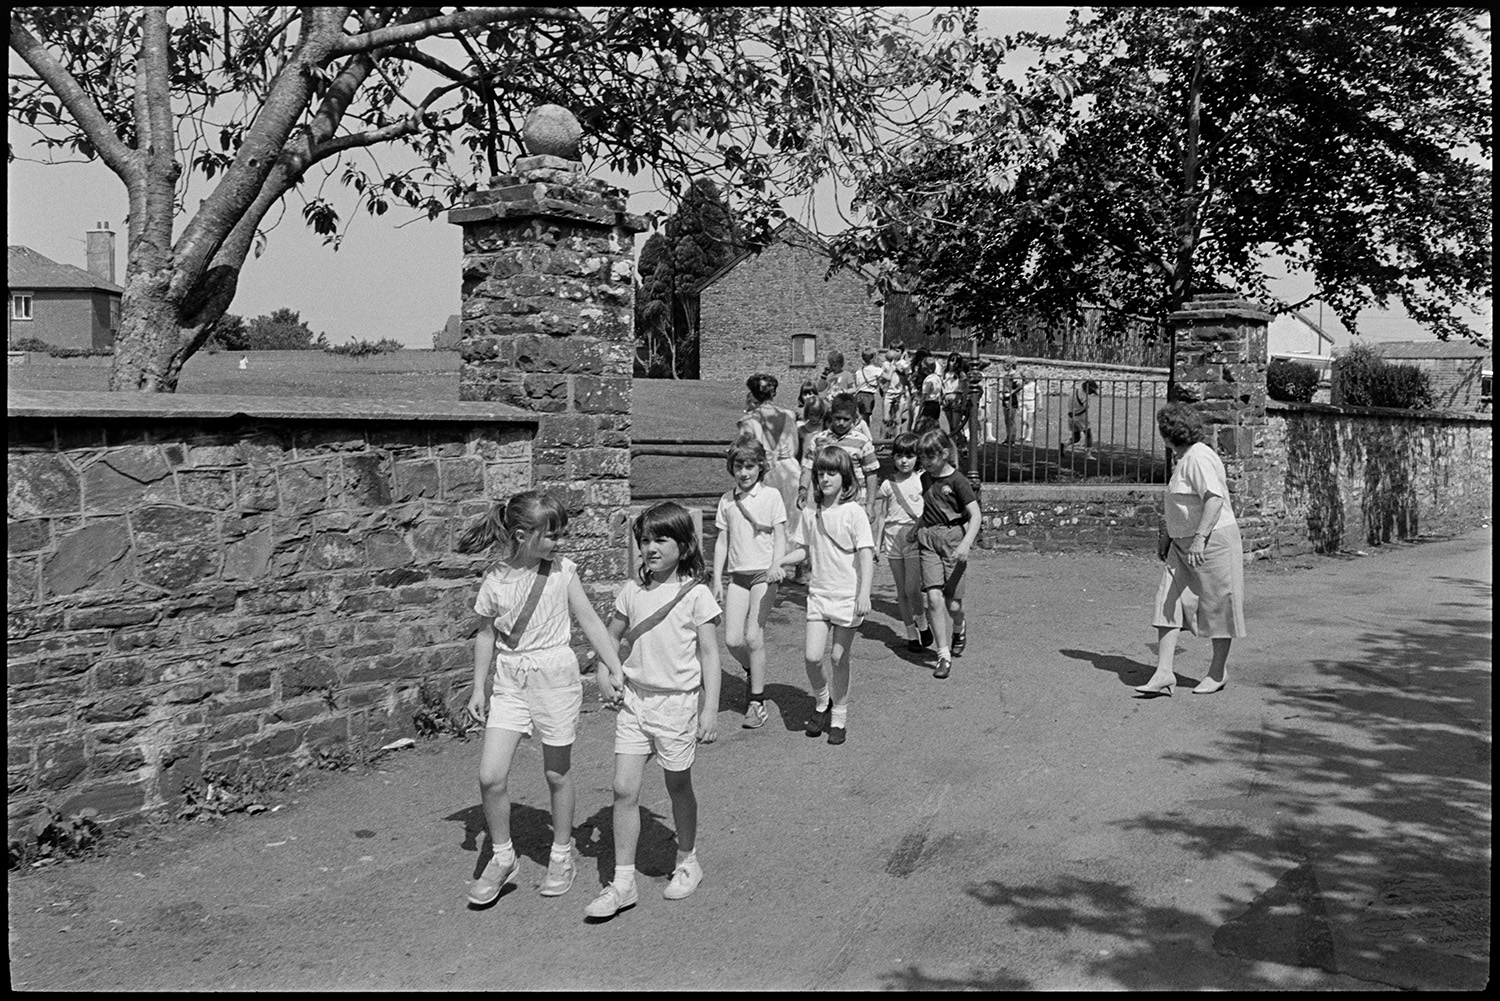 Children playing rounders in park. Returning through village.
[Children from Chulmleigh Primary School leaving Chulmleigh park and walking along a road back to school after playing rounders in the park. Jean Harris, a teacher, is supervising them.]